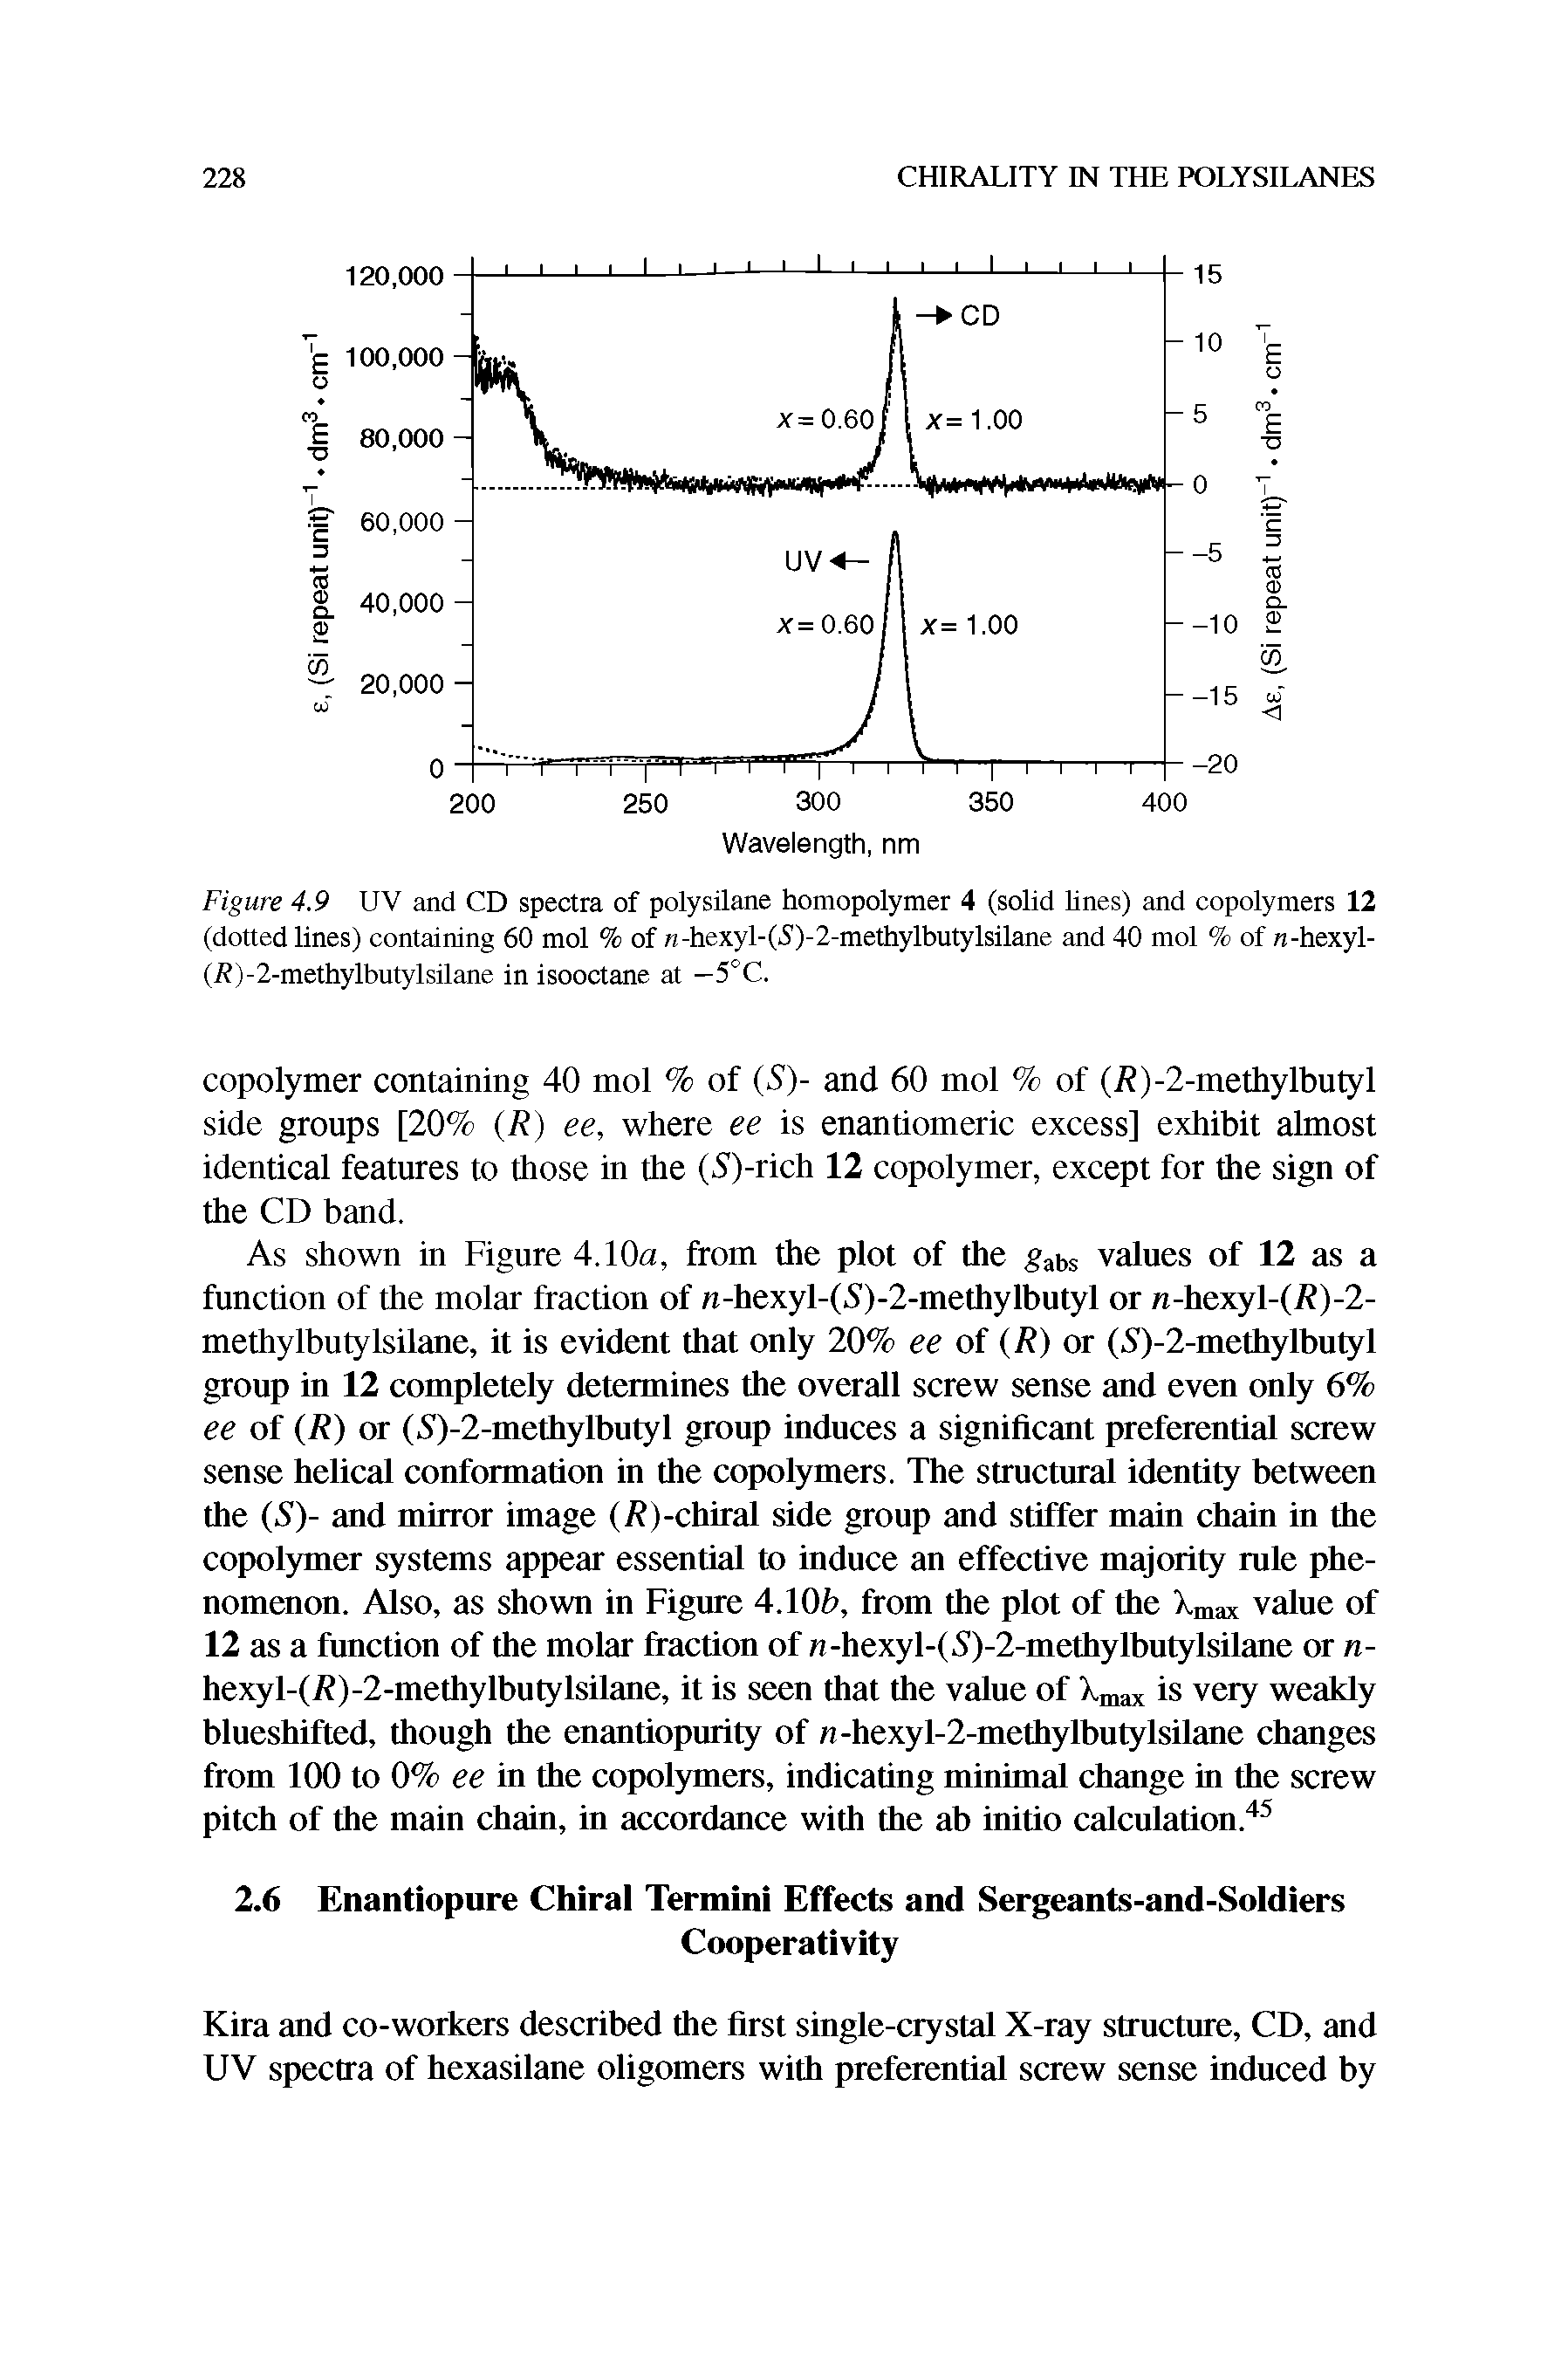 Figure 4.9 UV and CD spectra of poly silane homopolymer 4 (solid lines) and copolymers 12 (dotted lines) containing 60 mol % of -hexyl-(5)-2-methylbutylsilane and 40 mol % of n-hexyl-(R)-2-methylbutylsilane in isooctane at —5°C.